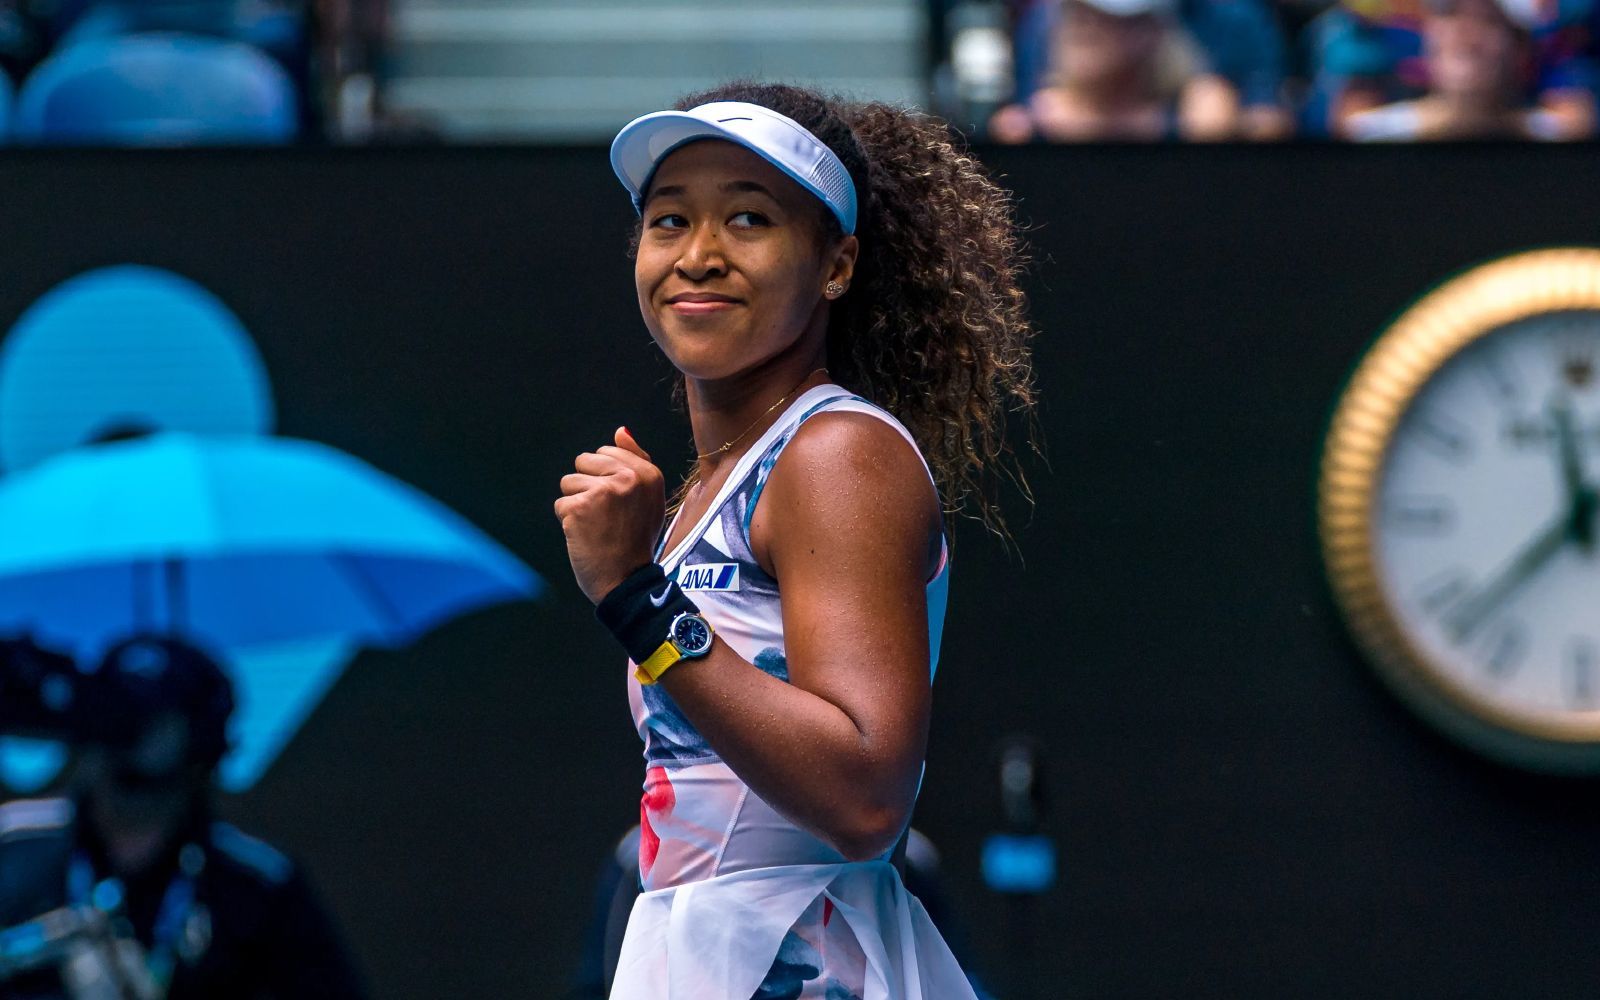 Naomi Osaka's life and career in a new Netflix docuseries Available from July 16th